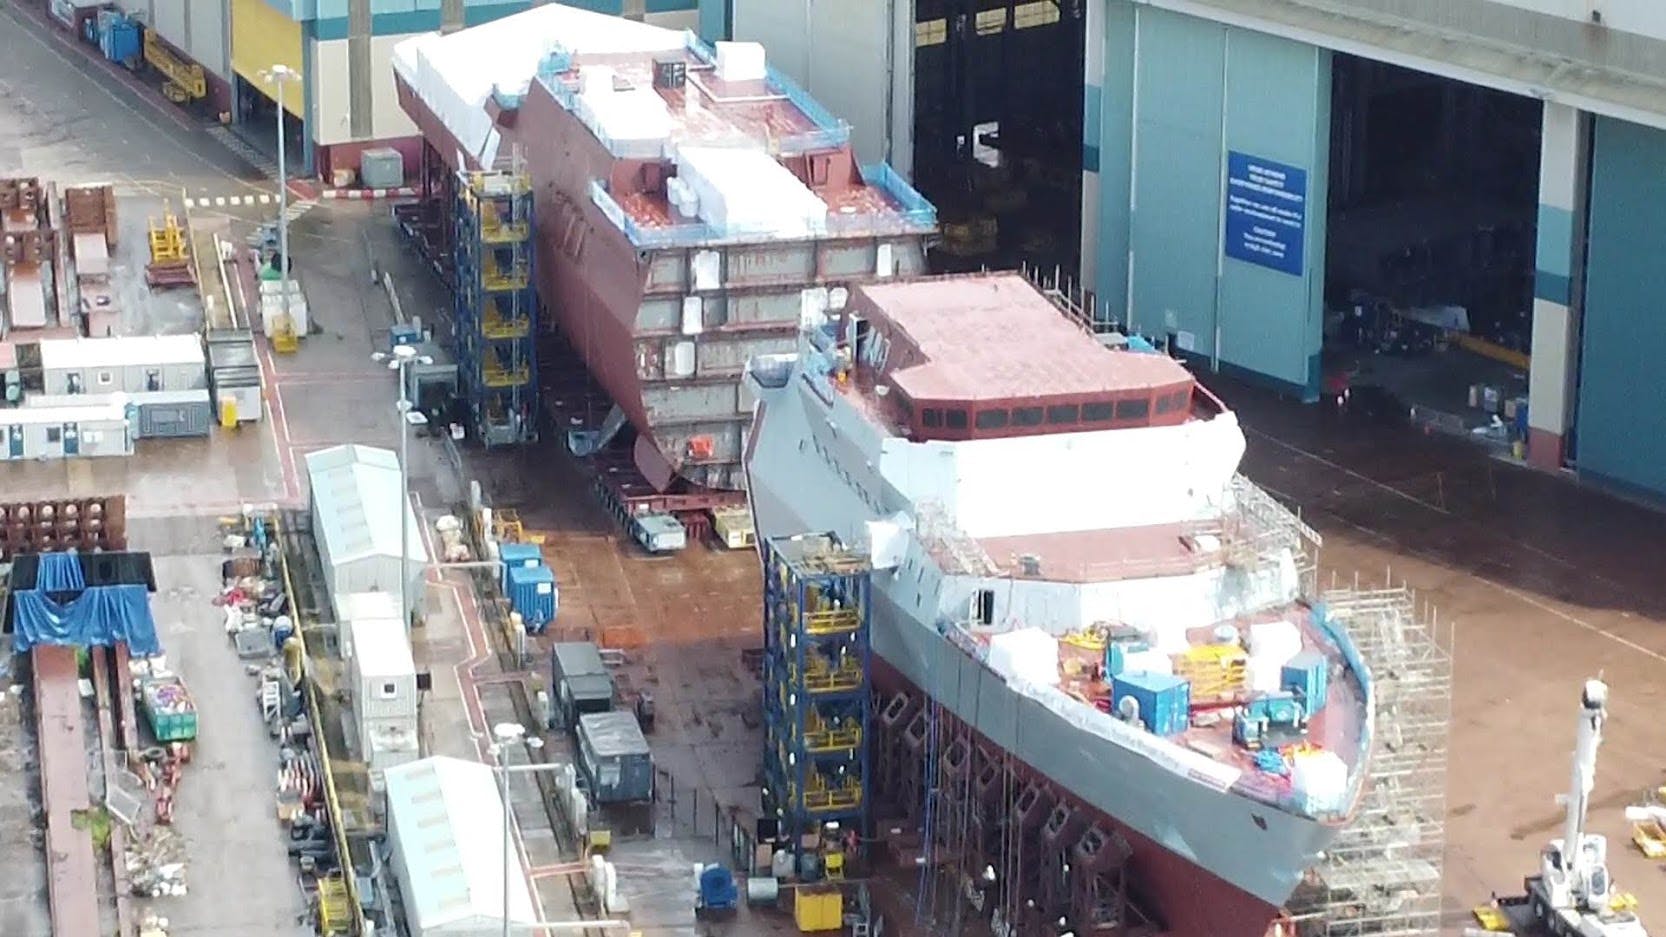 Drone shots show new frigate on River Clyde